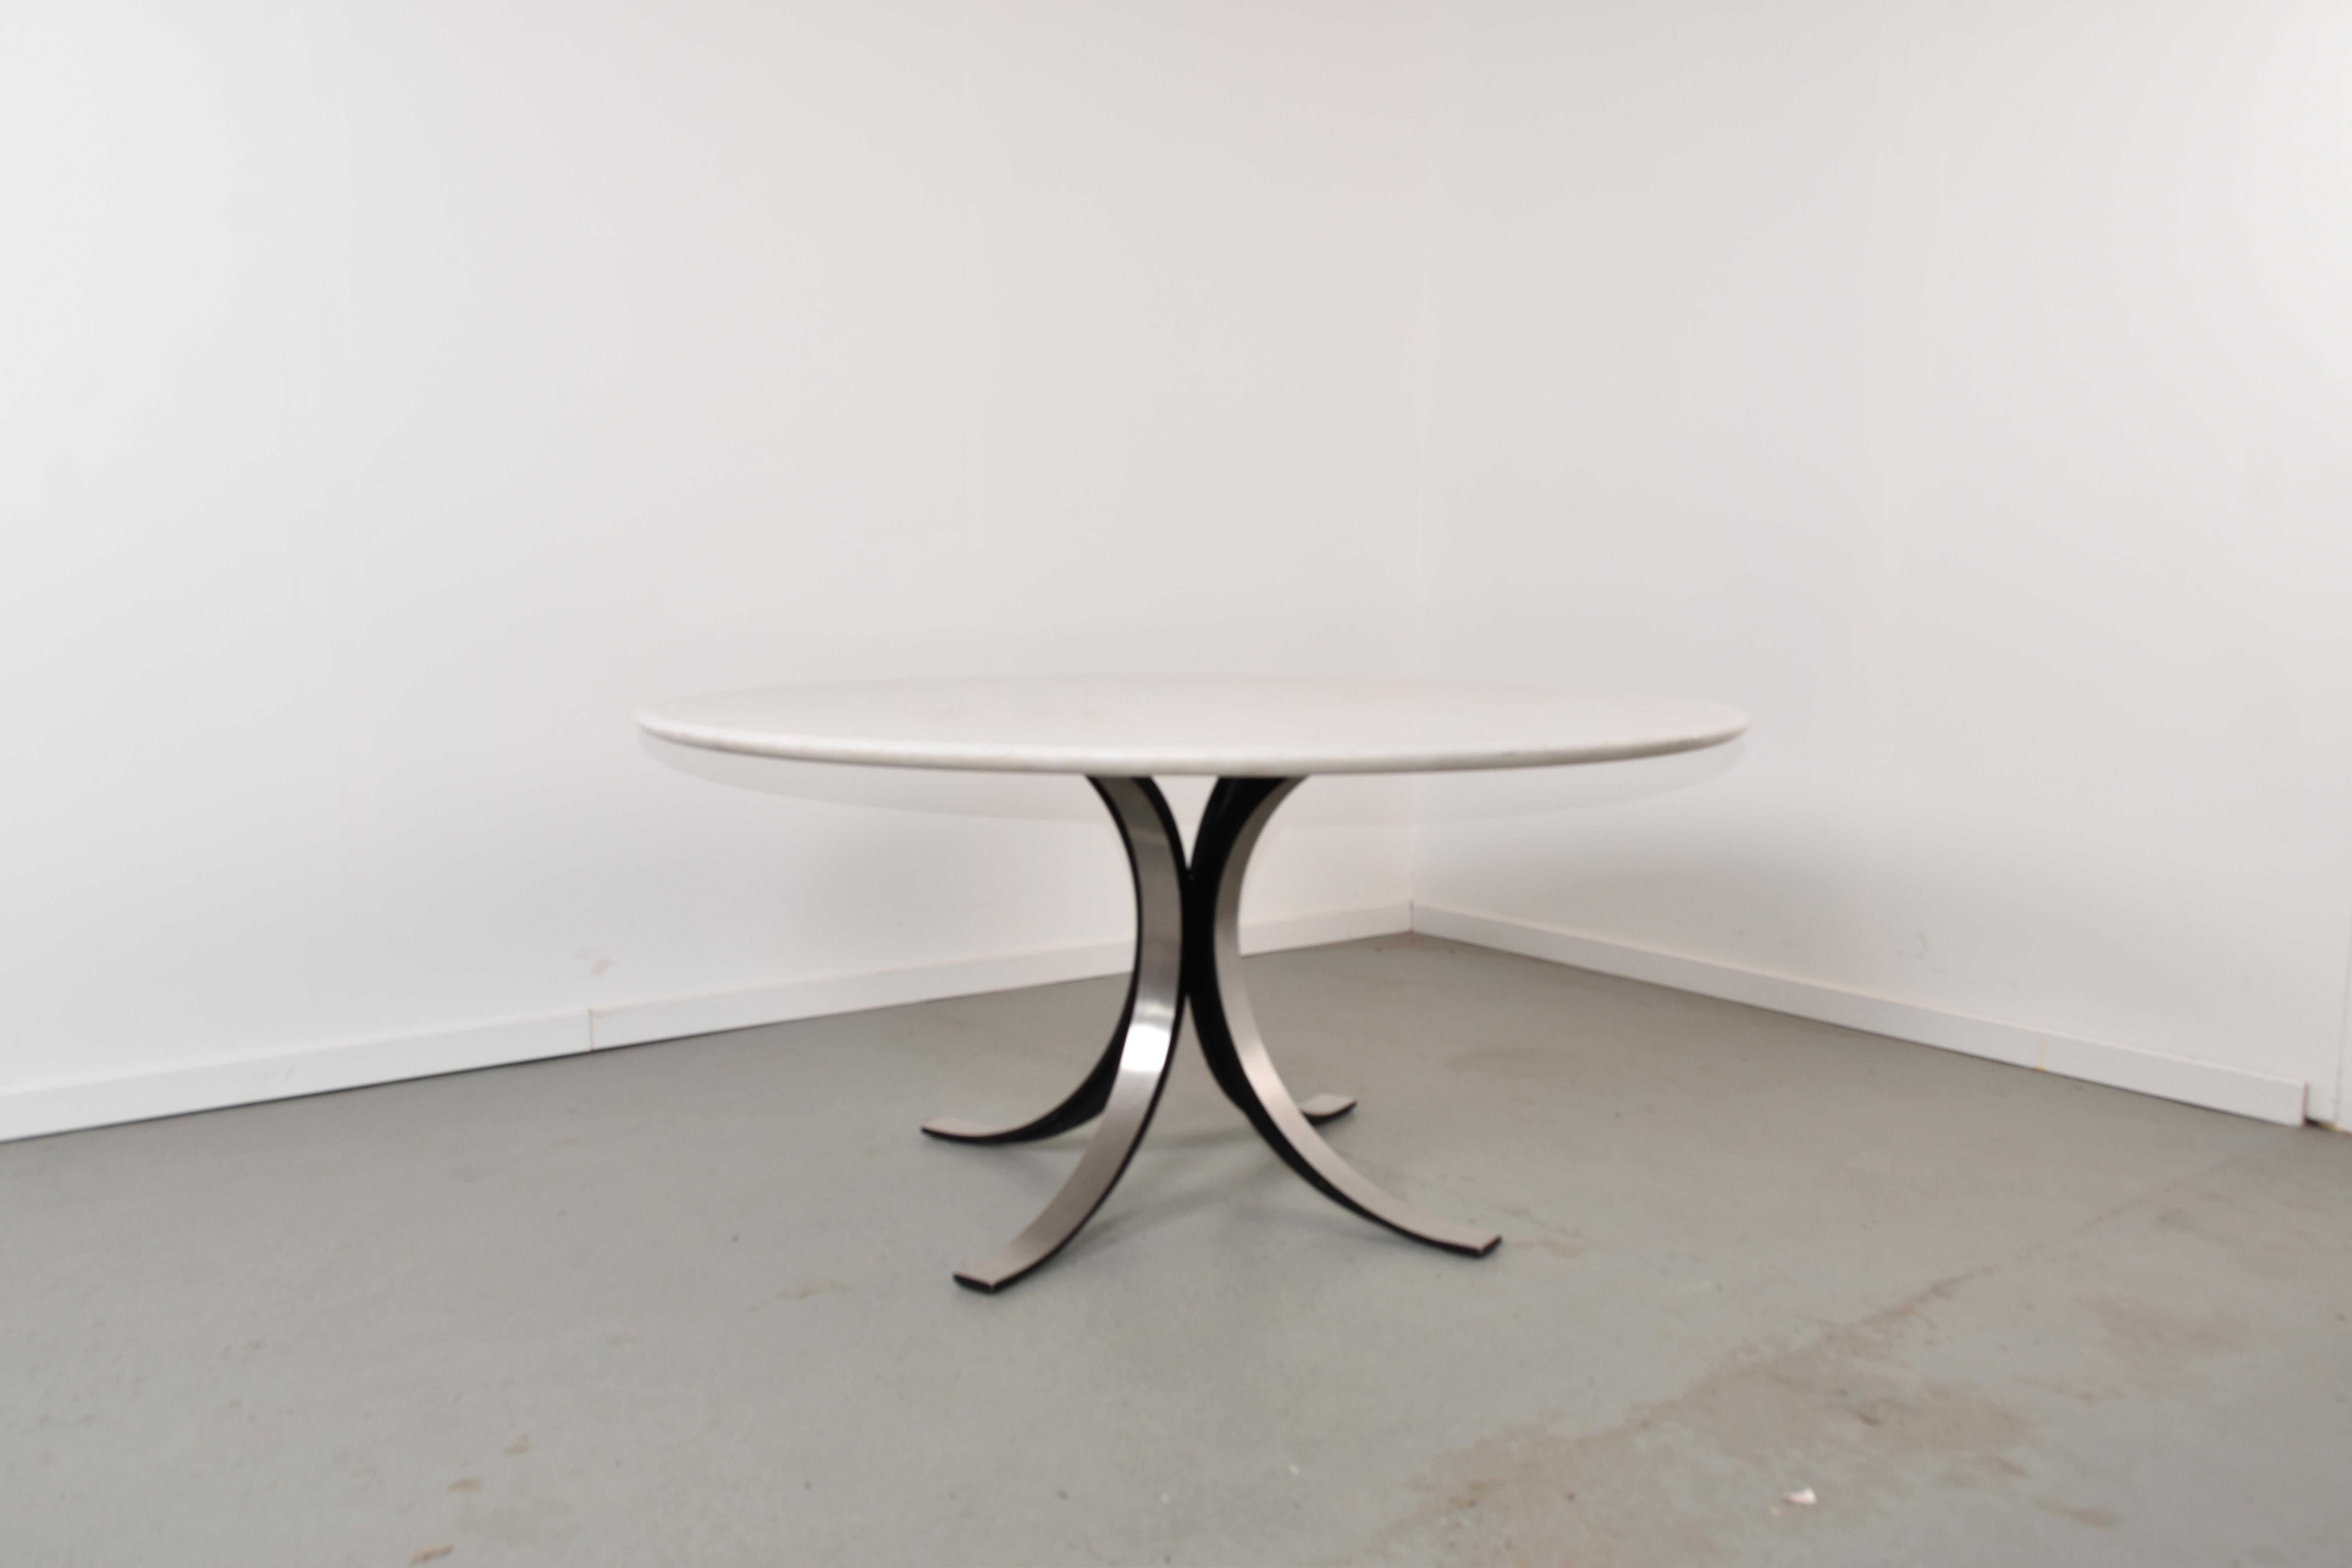 T69 low dining table by Osvaldo Borsani & Eugenio Gerli for Tecno.

The table top is solid white marble in good condition with some signs of use consistent with age.

The base is made from slender metal and give a curvacious and modern